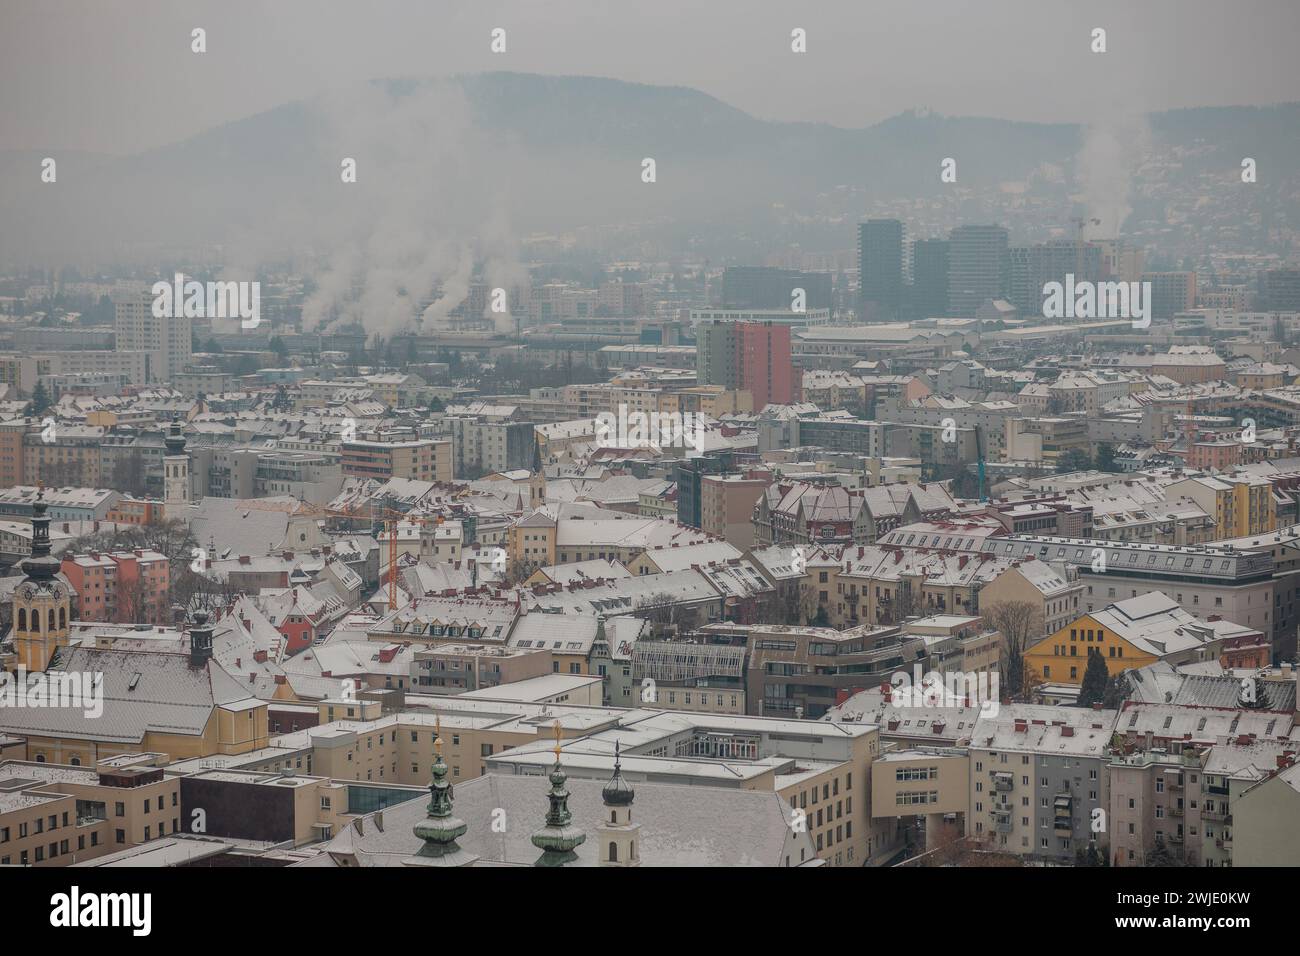 White winter panorama of city of Graz, Austria from famous schlossberg hill. Cold cloudy day, mist rising up. Stock Photo